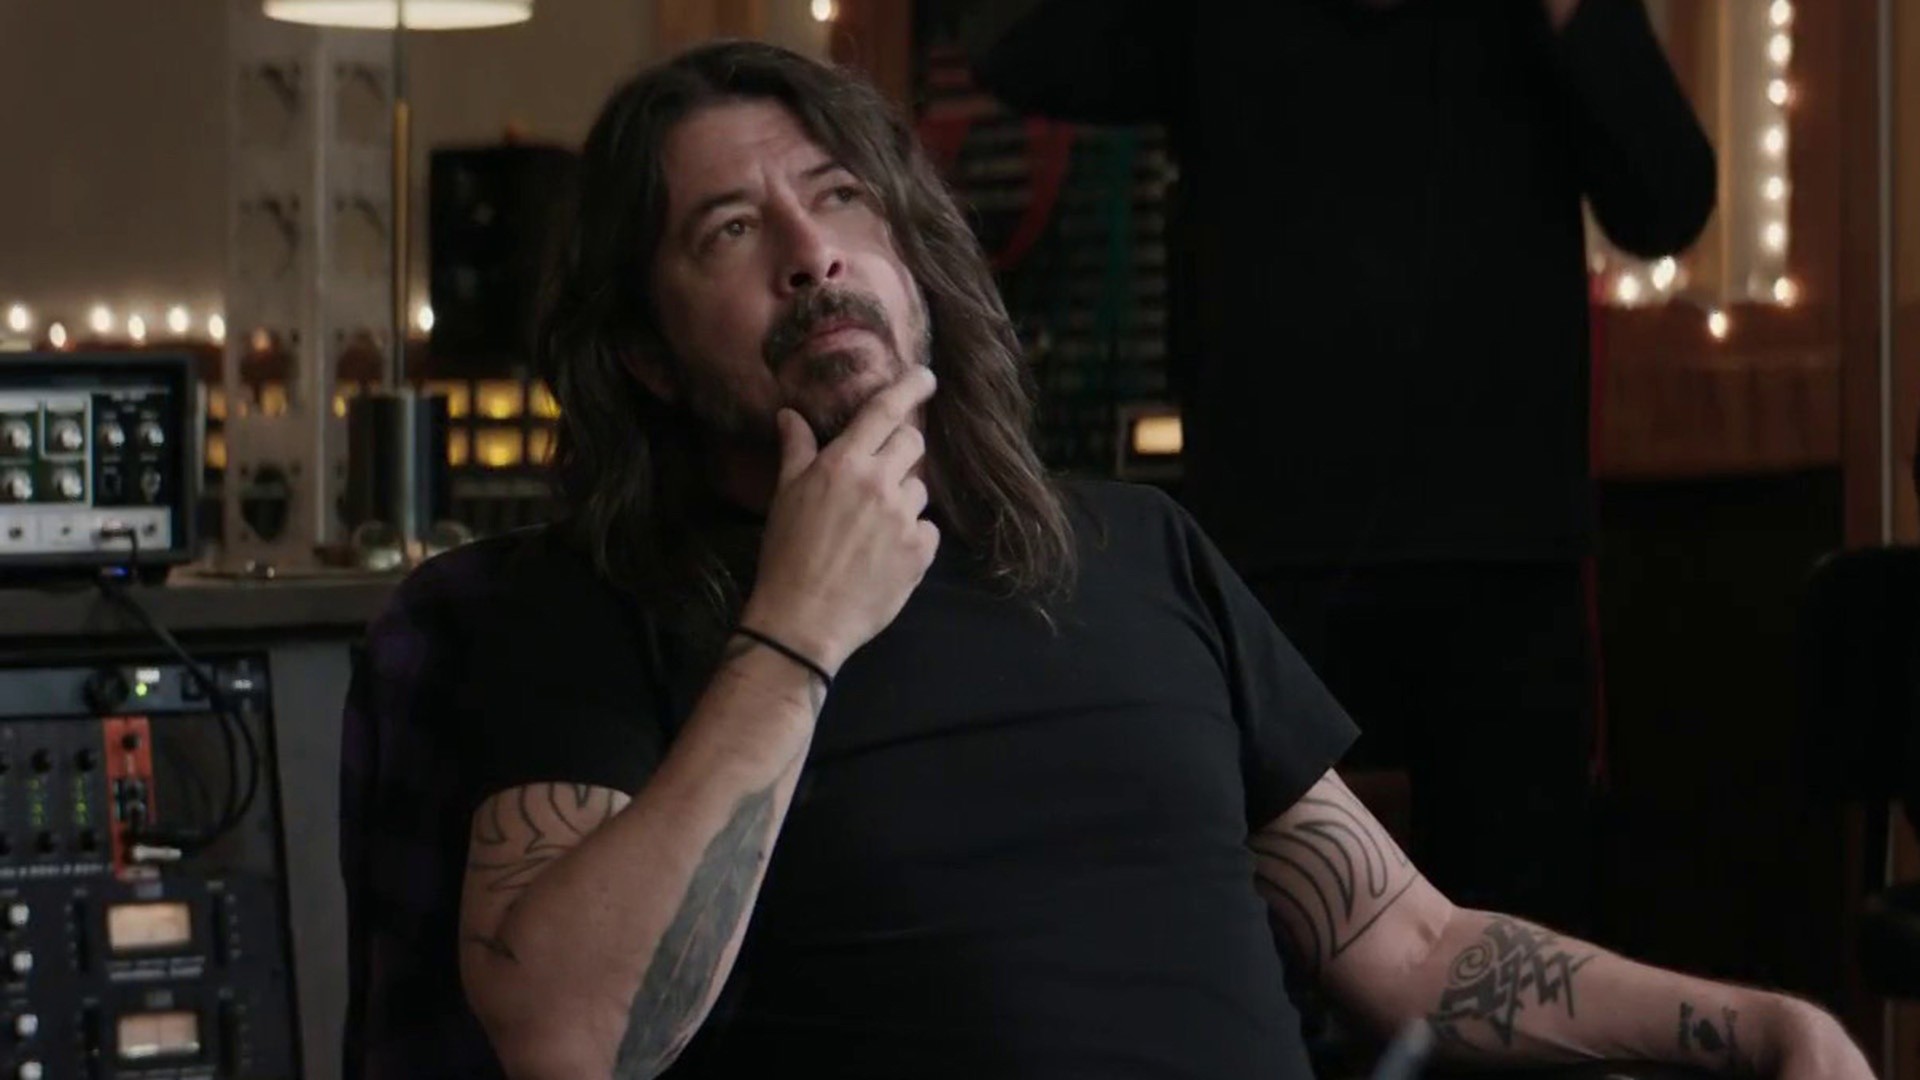 Watch TODAY Excerpt Dave Grohl thanks Canada in Super Bowl ad for